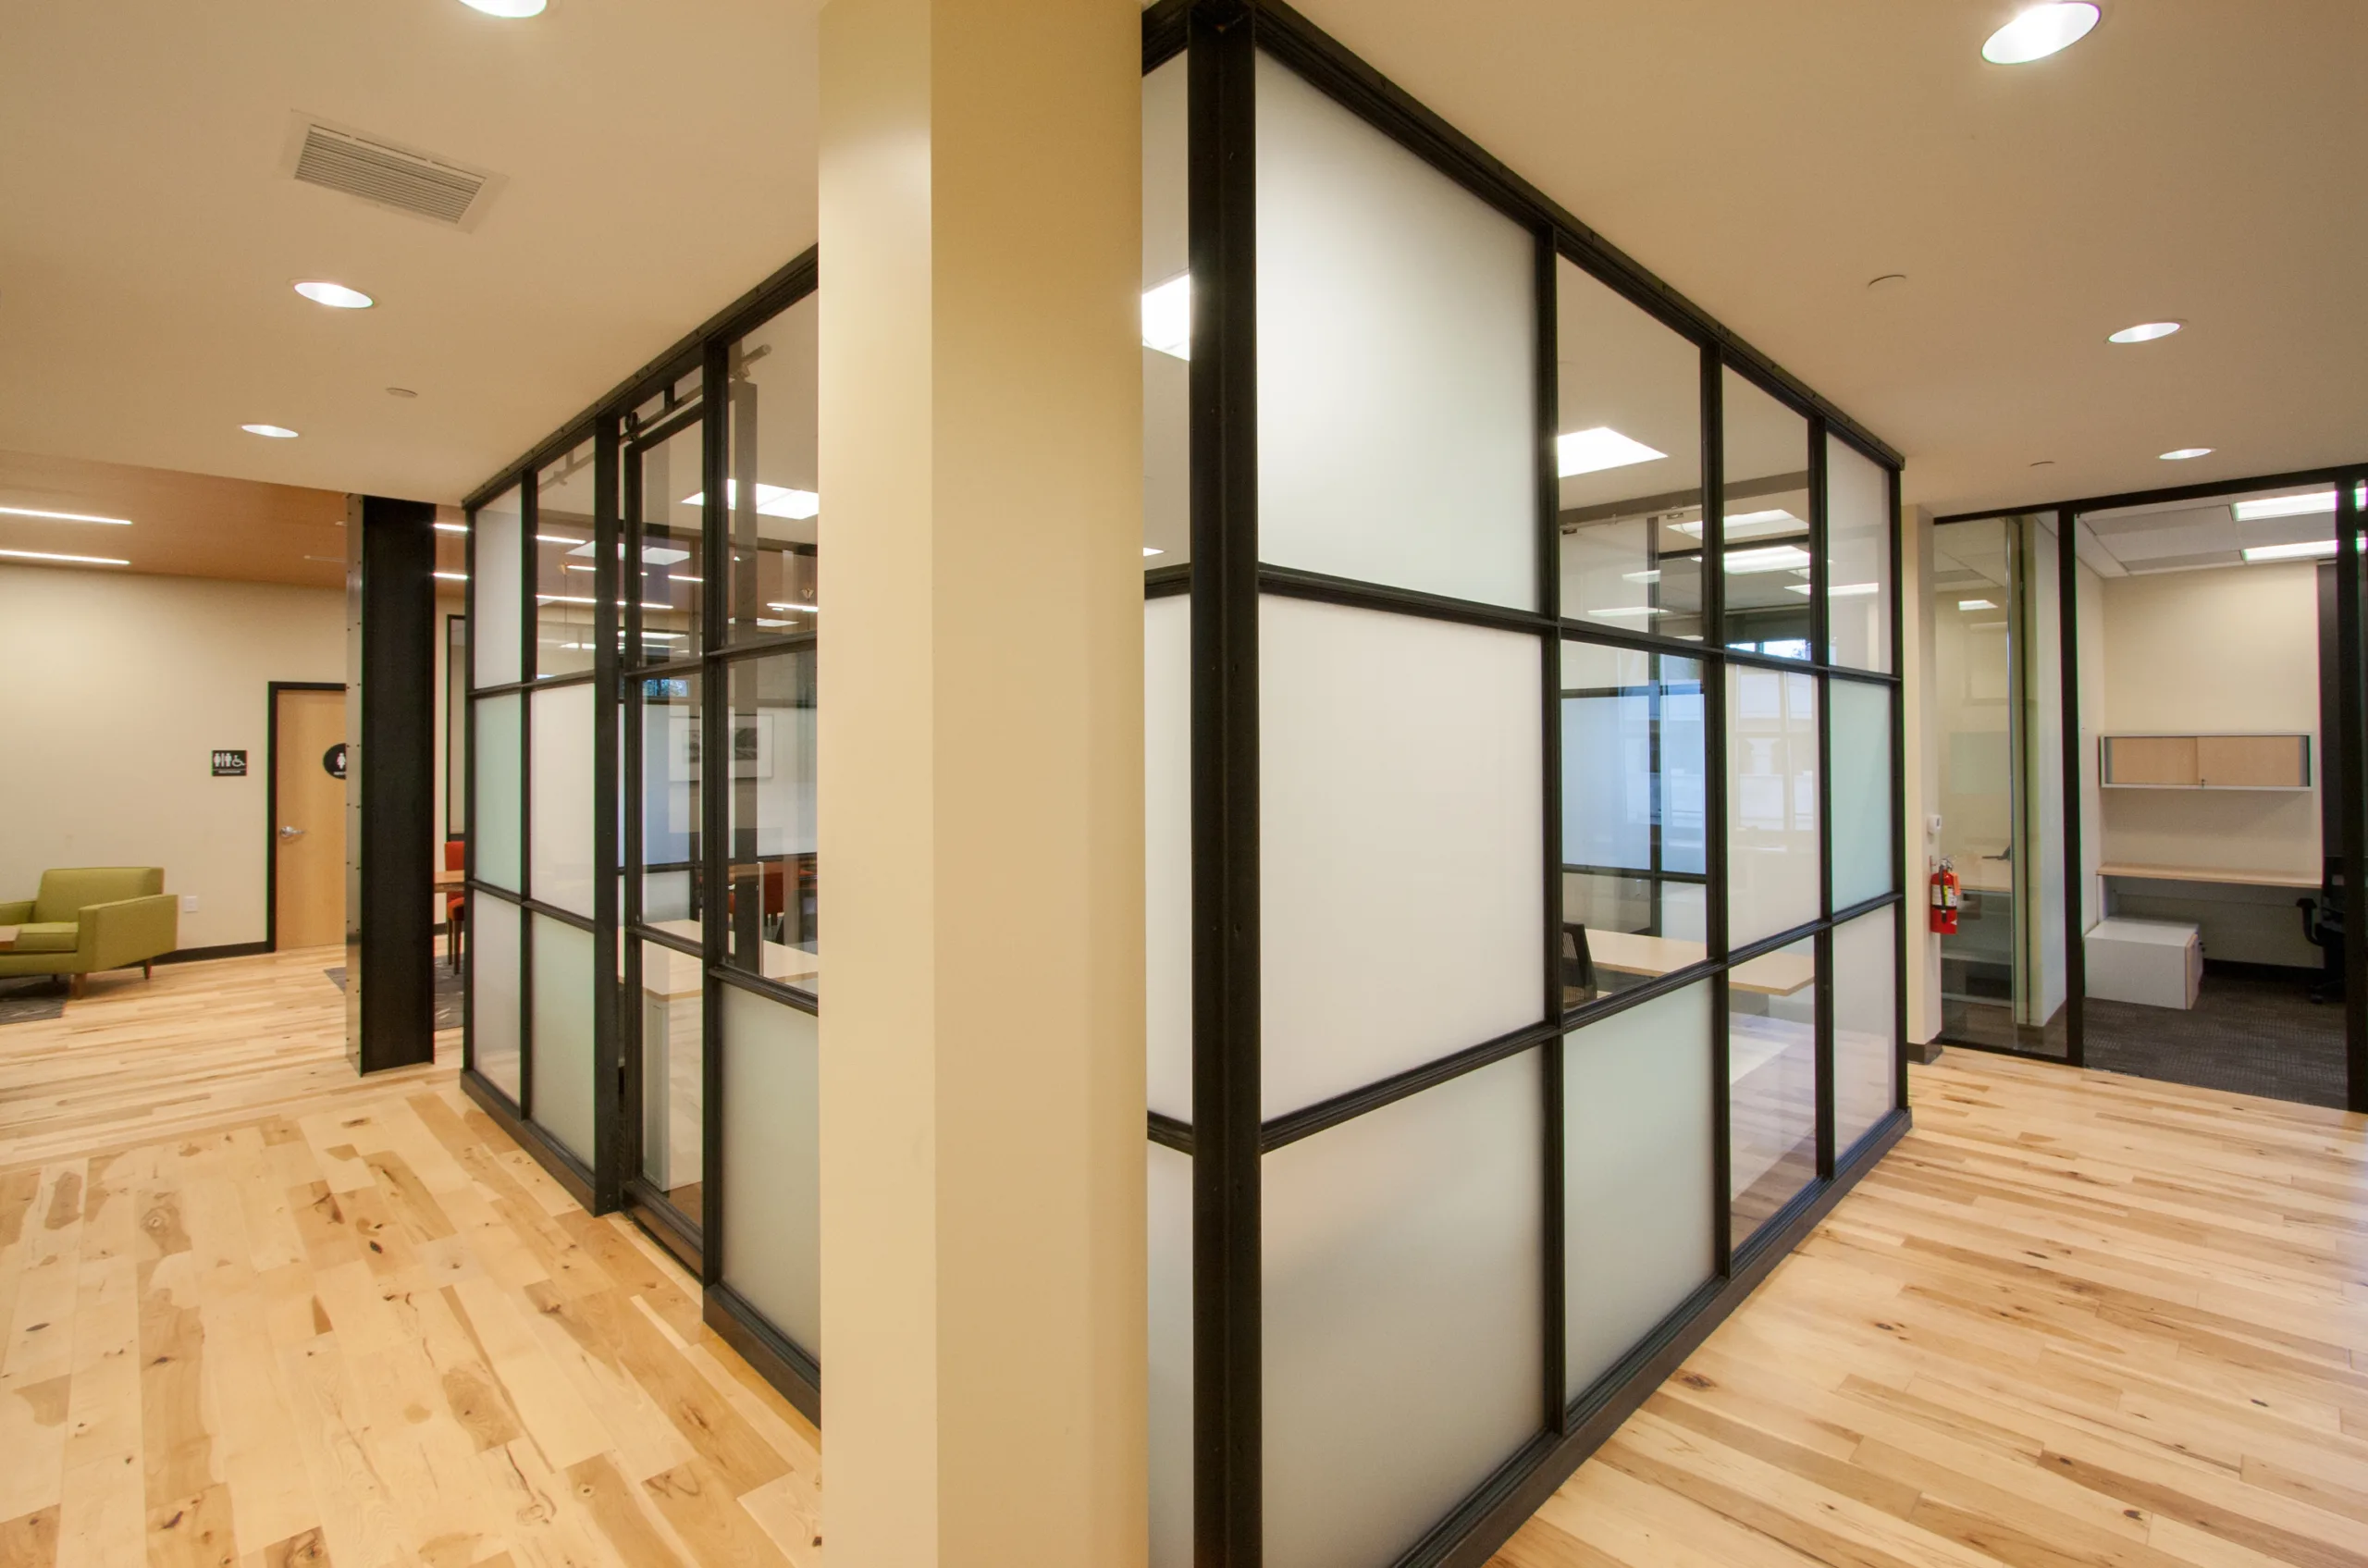 An office with glass partitions and hardwood floors.